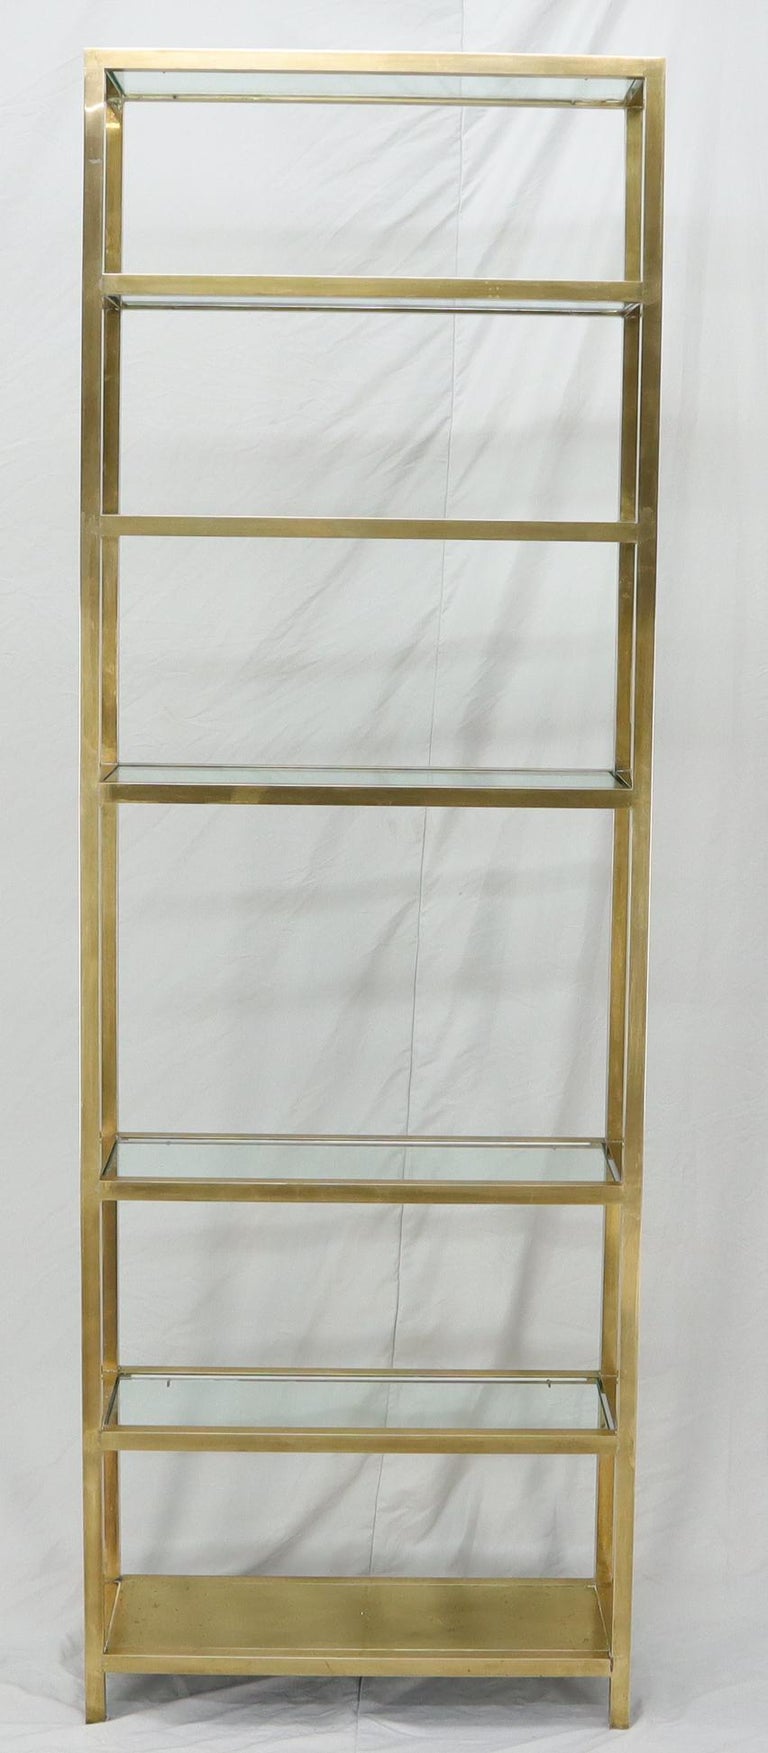 Slim narrow and tall brass etagere all beautifully braised with heavy 3/4